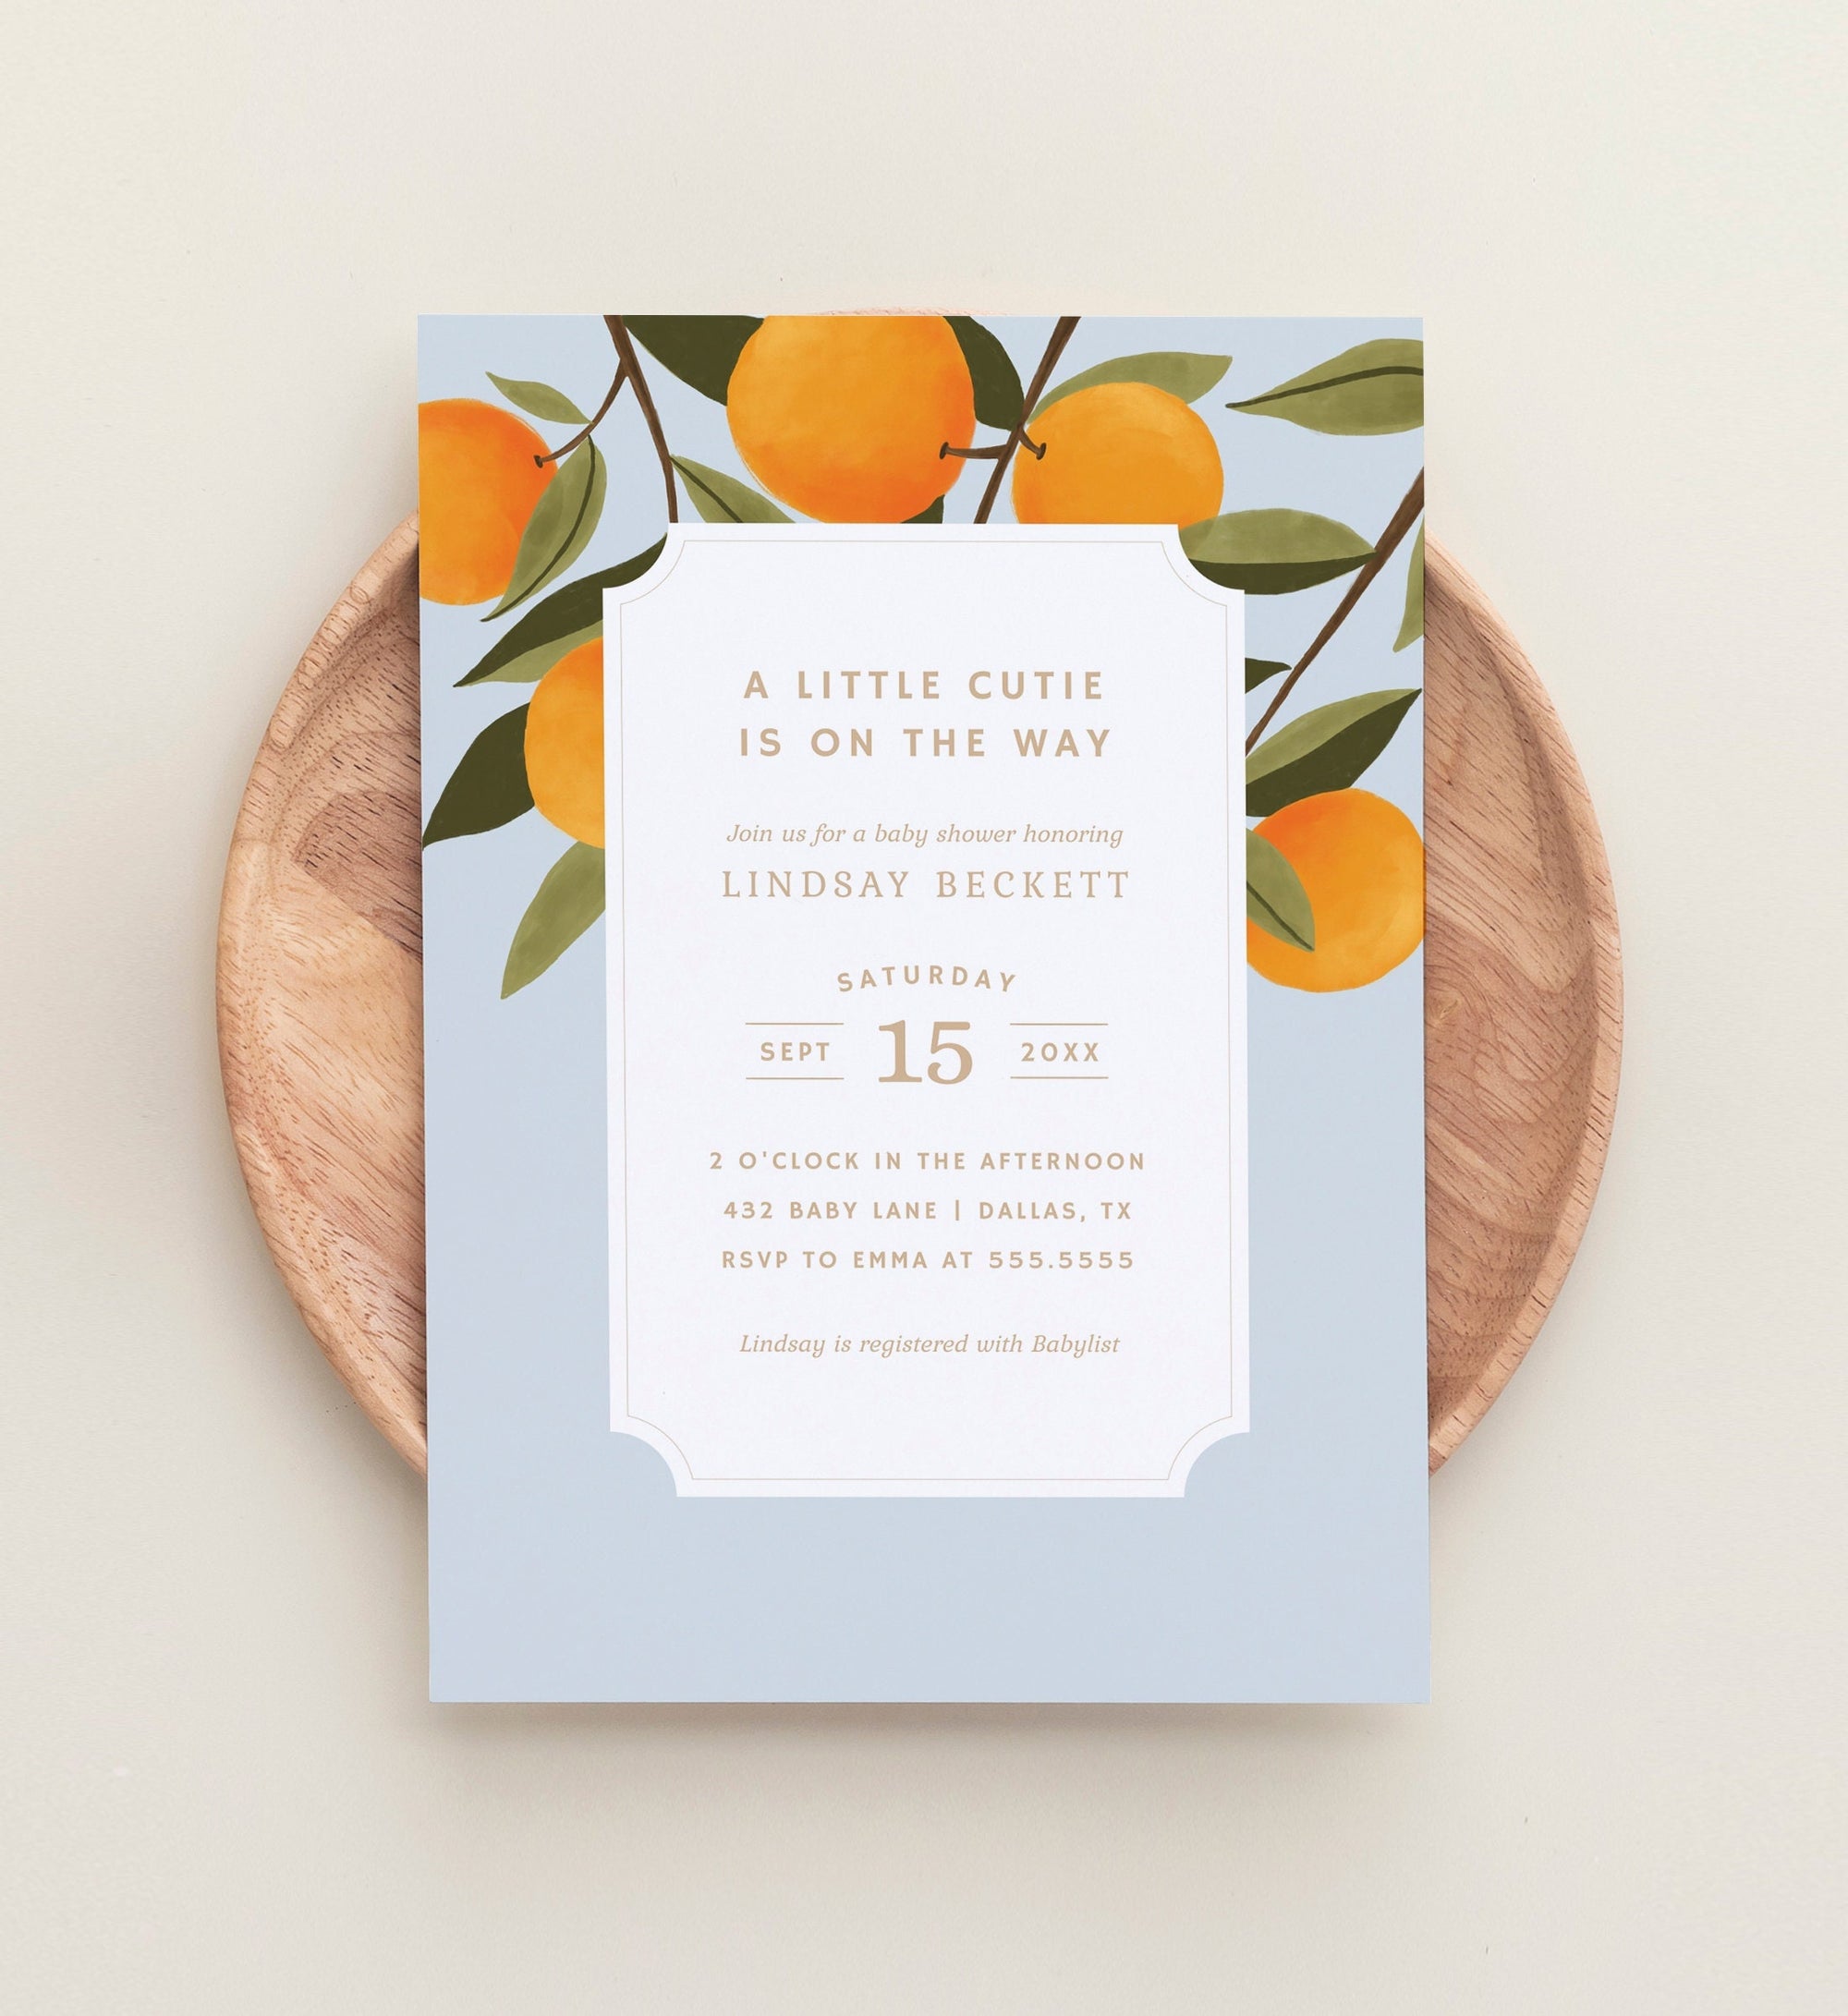 A Little Cutie is on the Way Baby Shower Invitation, Citrus Baby Shower Invite, Printable Invitation Template, DIGITAL DOWNLOAD